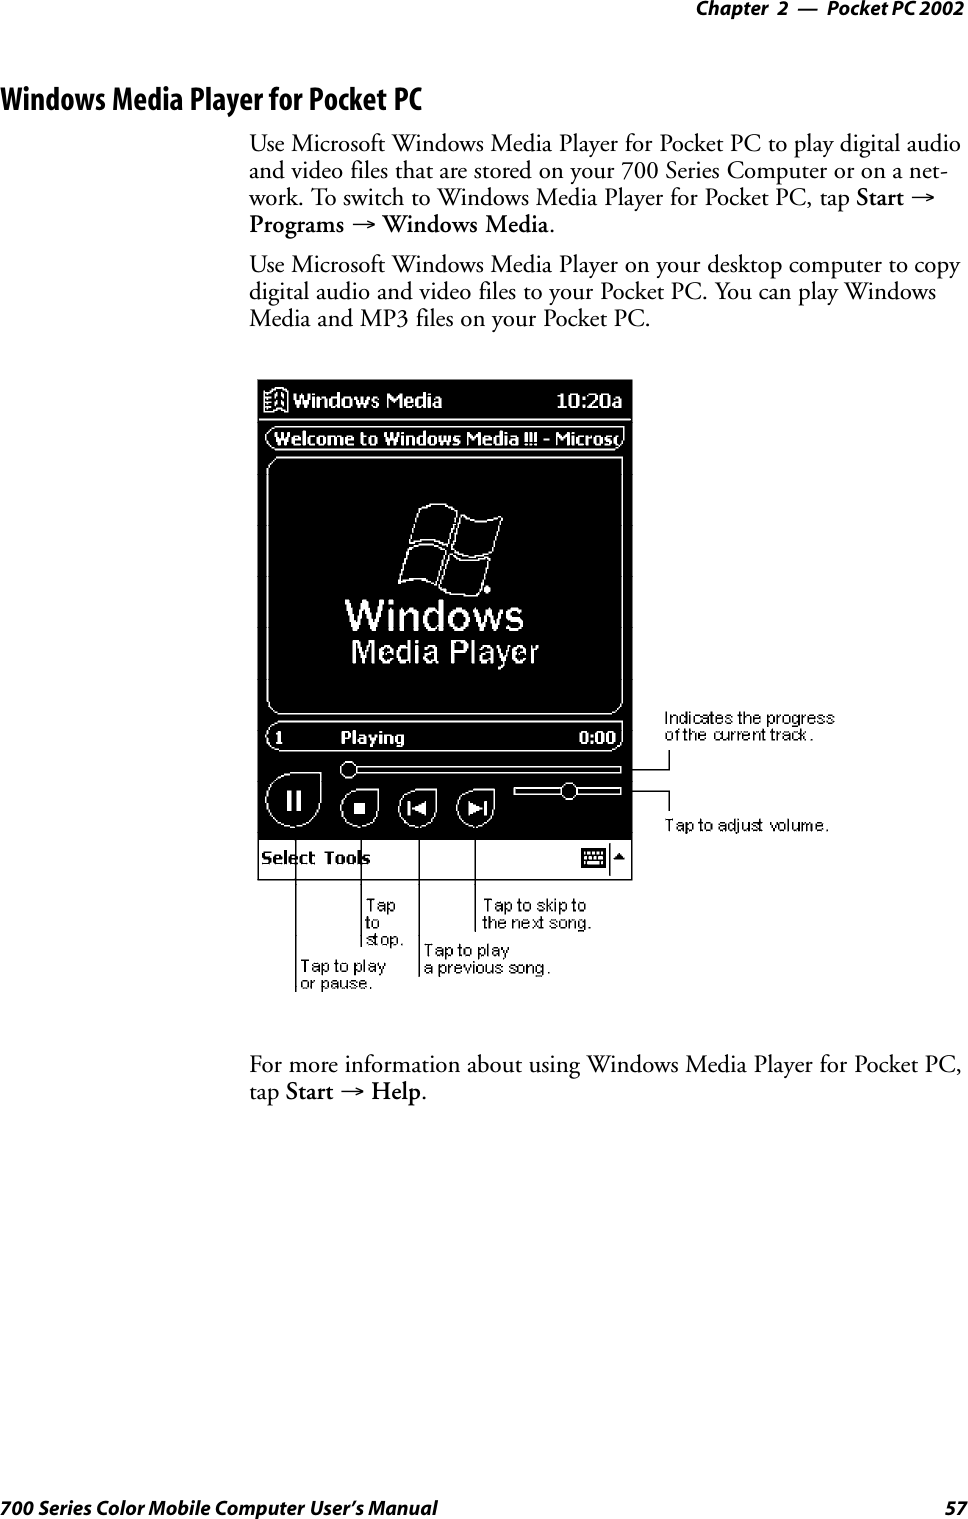 Pocket PC 2002—Chapter 257700 Series Color Mobile Computer User’s ManualWindows Media Player for Pocket PCUse Microsoft Windows Media Player for Pocket PC to play digital audioand video files that are stored on your 700 Series Computer or on a net-work. To switch to Windows Media Player for Pocket PC, tap Start →Programs →Windows Media.Use Microsoft Windows Media Player on your desktop computer to copydigital audio and video files to your Pocket PC. You can play WindowsMedia and MP3 files on your Pocket PC.For more information about using Windows Media Player for Pocket PC,tap Start →Help.